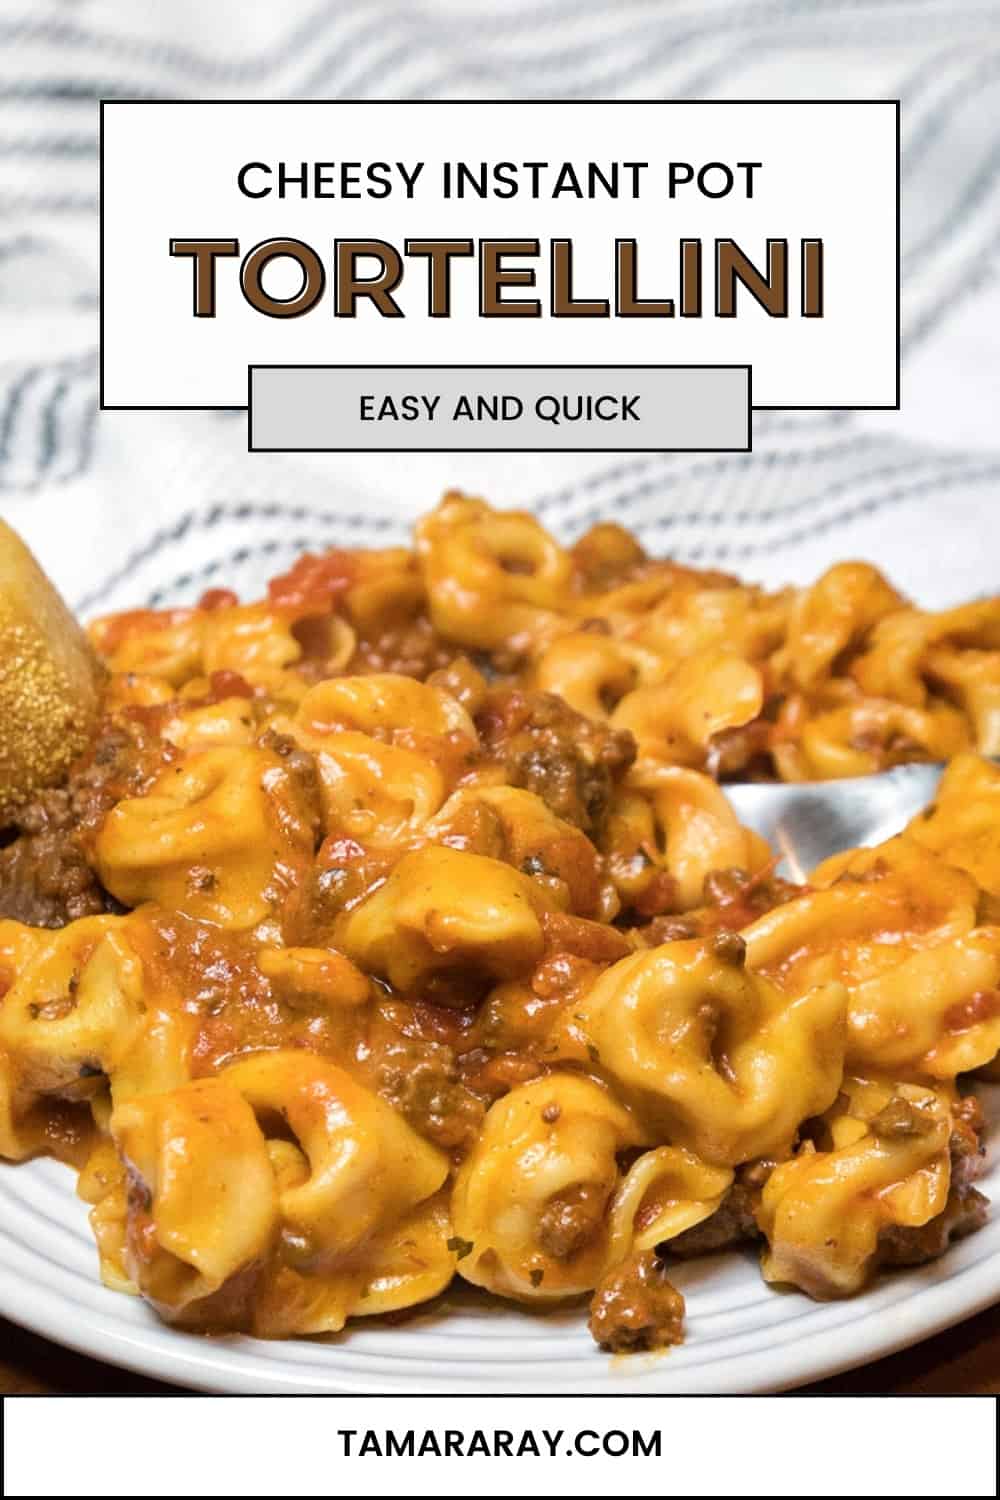 Cheesy Instant Pot tortellini on a plate.